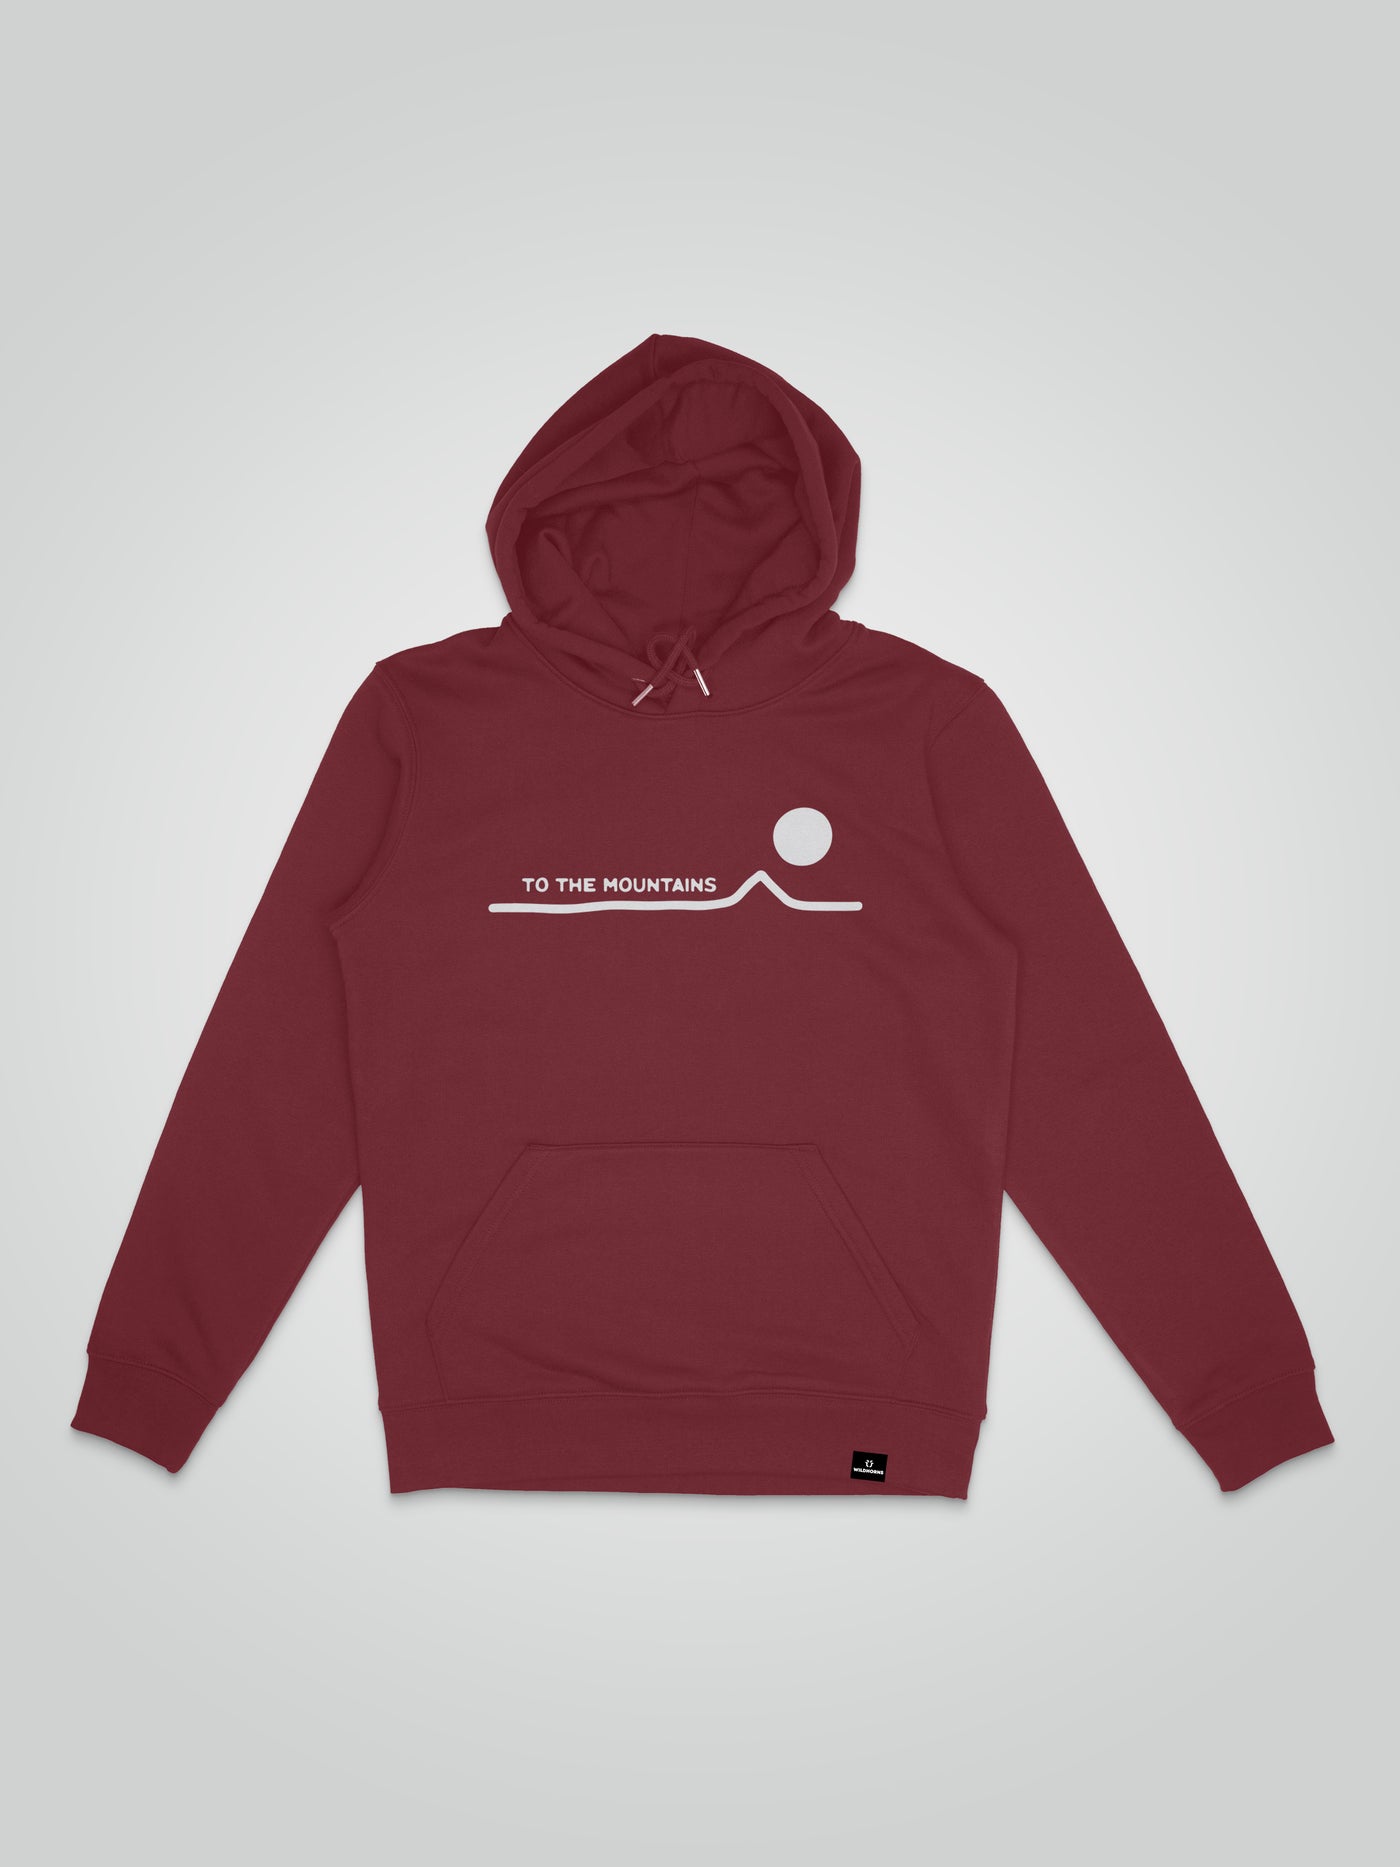 To The Mountains - Unisex Hoodie